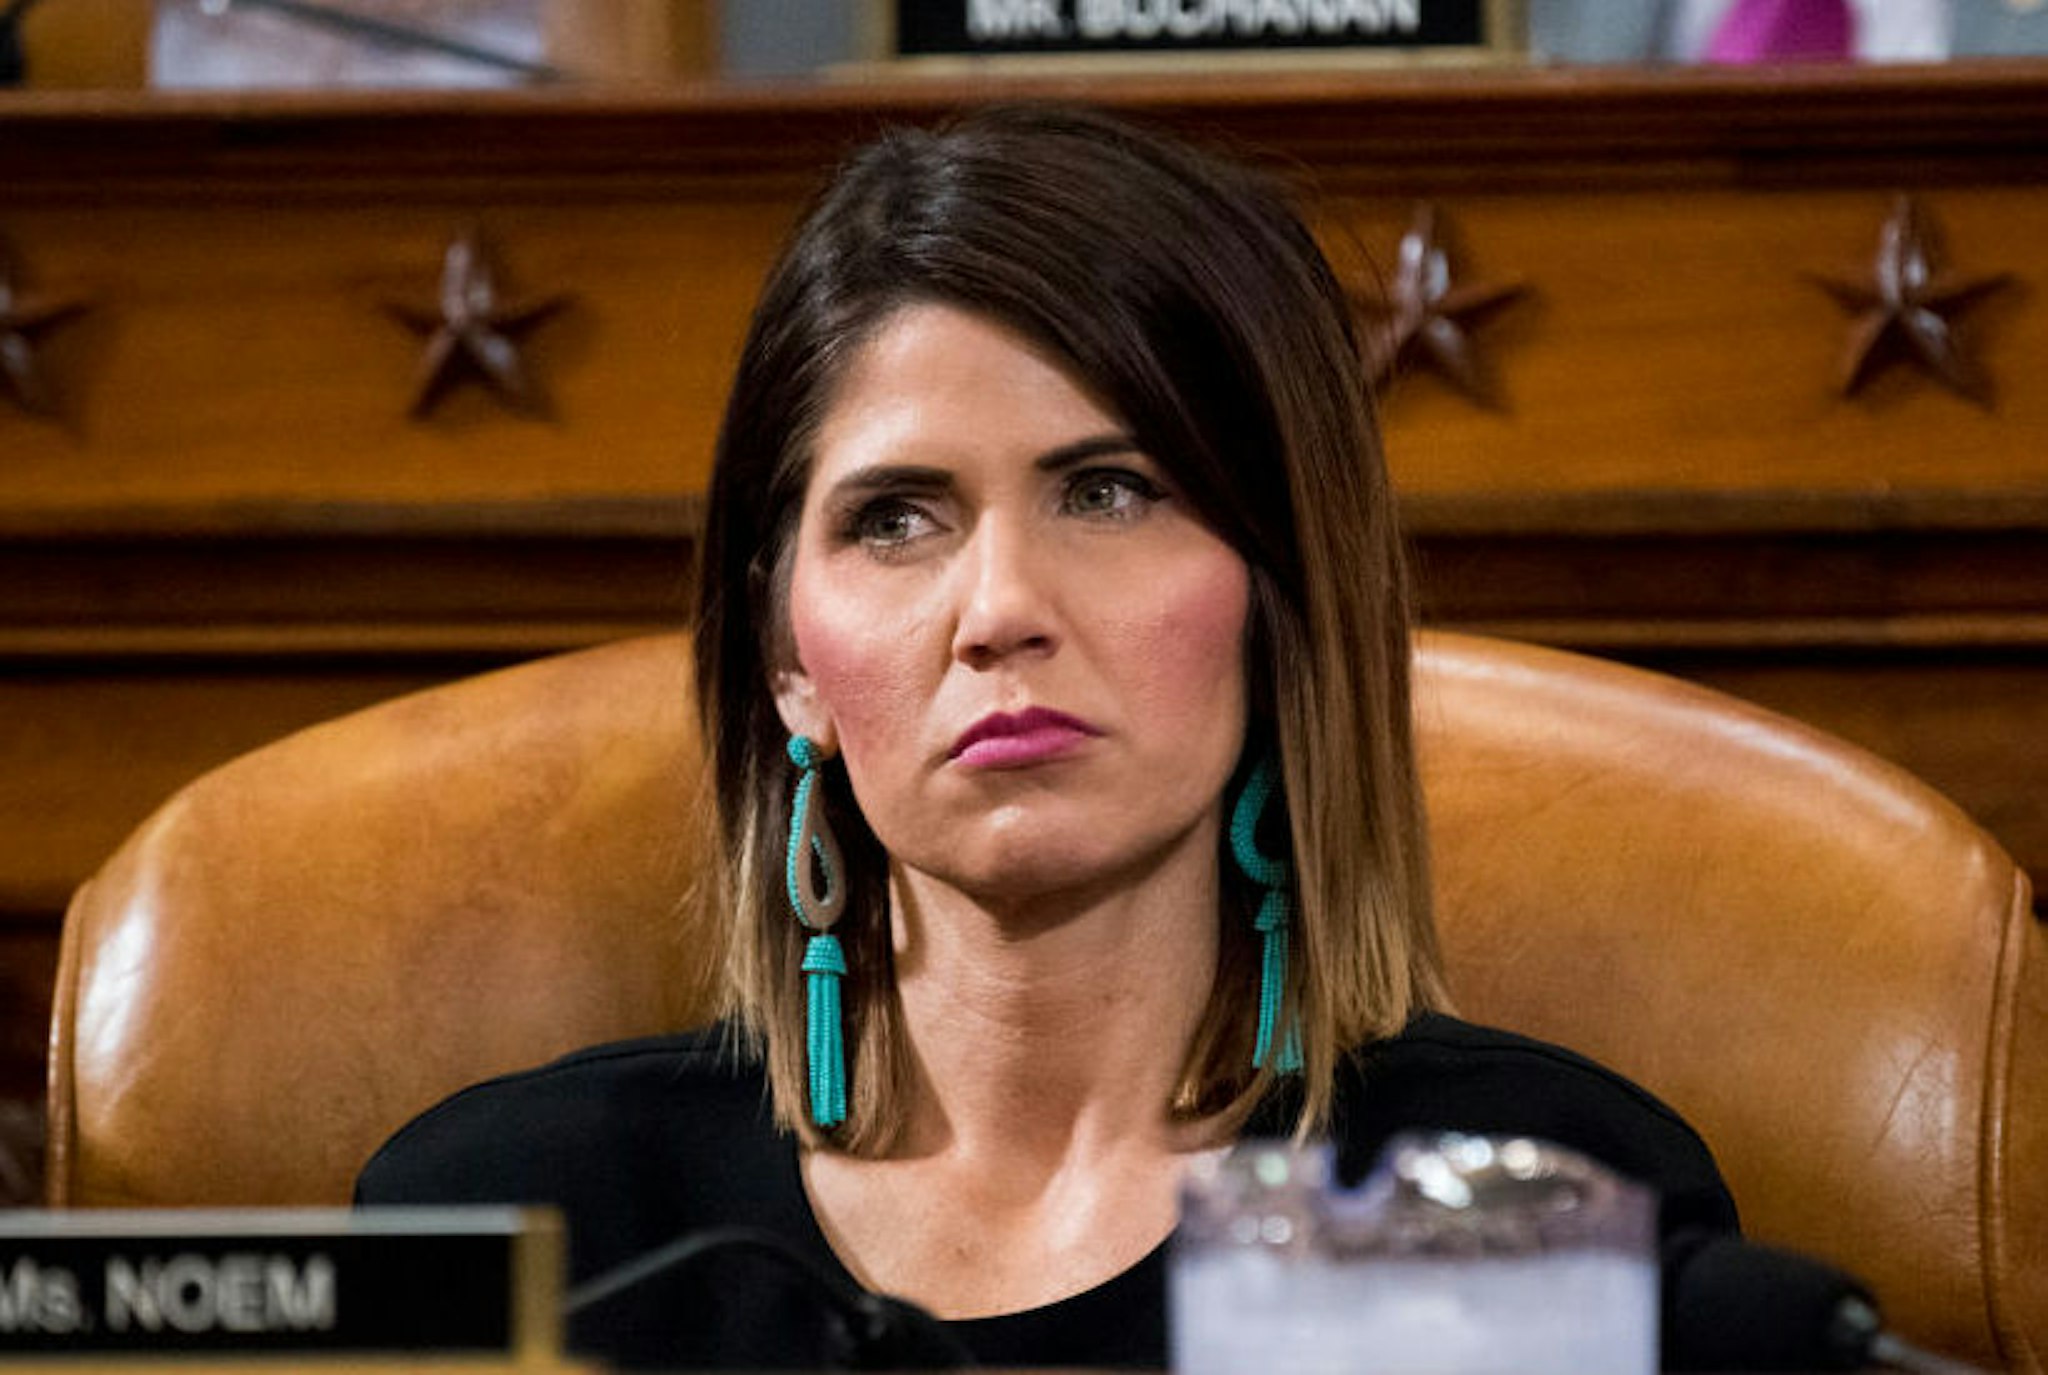 Rep. Kristi Noem, R-S. Dak., listens during the House Ways and Means Committee hearing on President Trumps budget proposals for fiscal year 2018 on Wednesday, May 24, 2017.